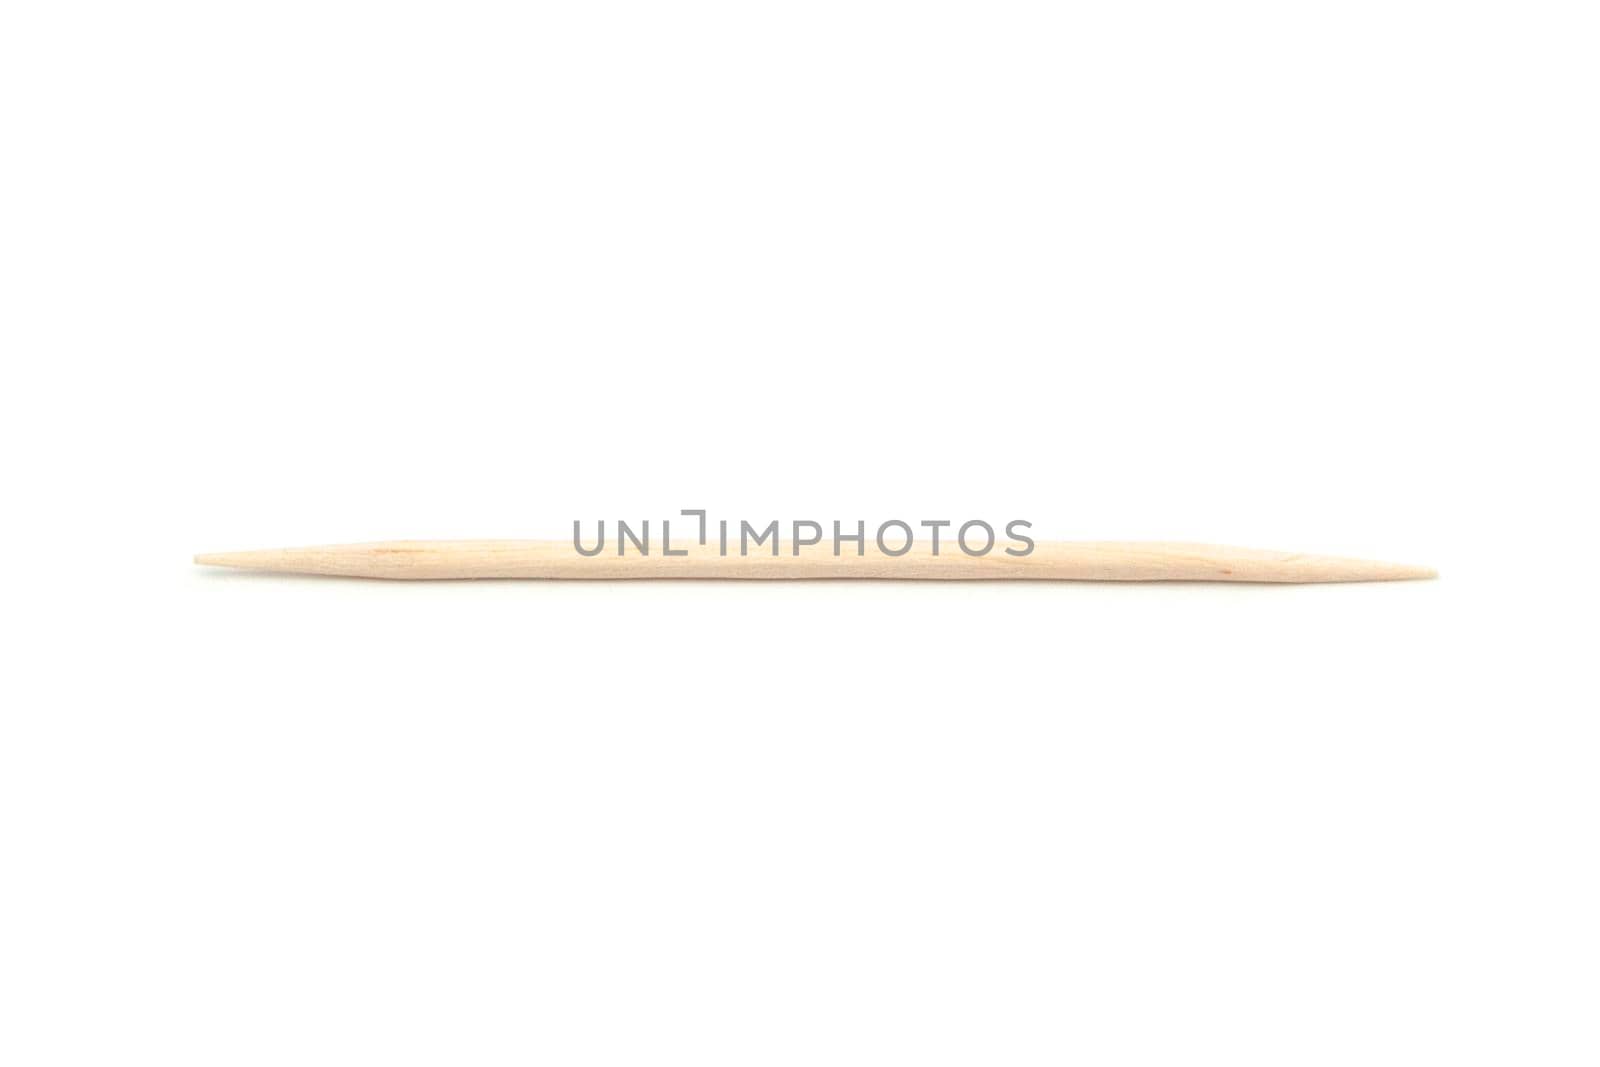 Wooden toothpicks isolated on white background with clipping path.